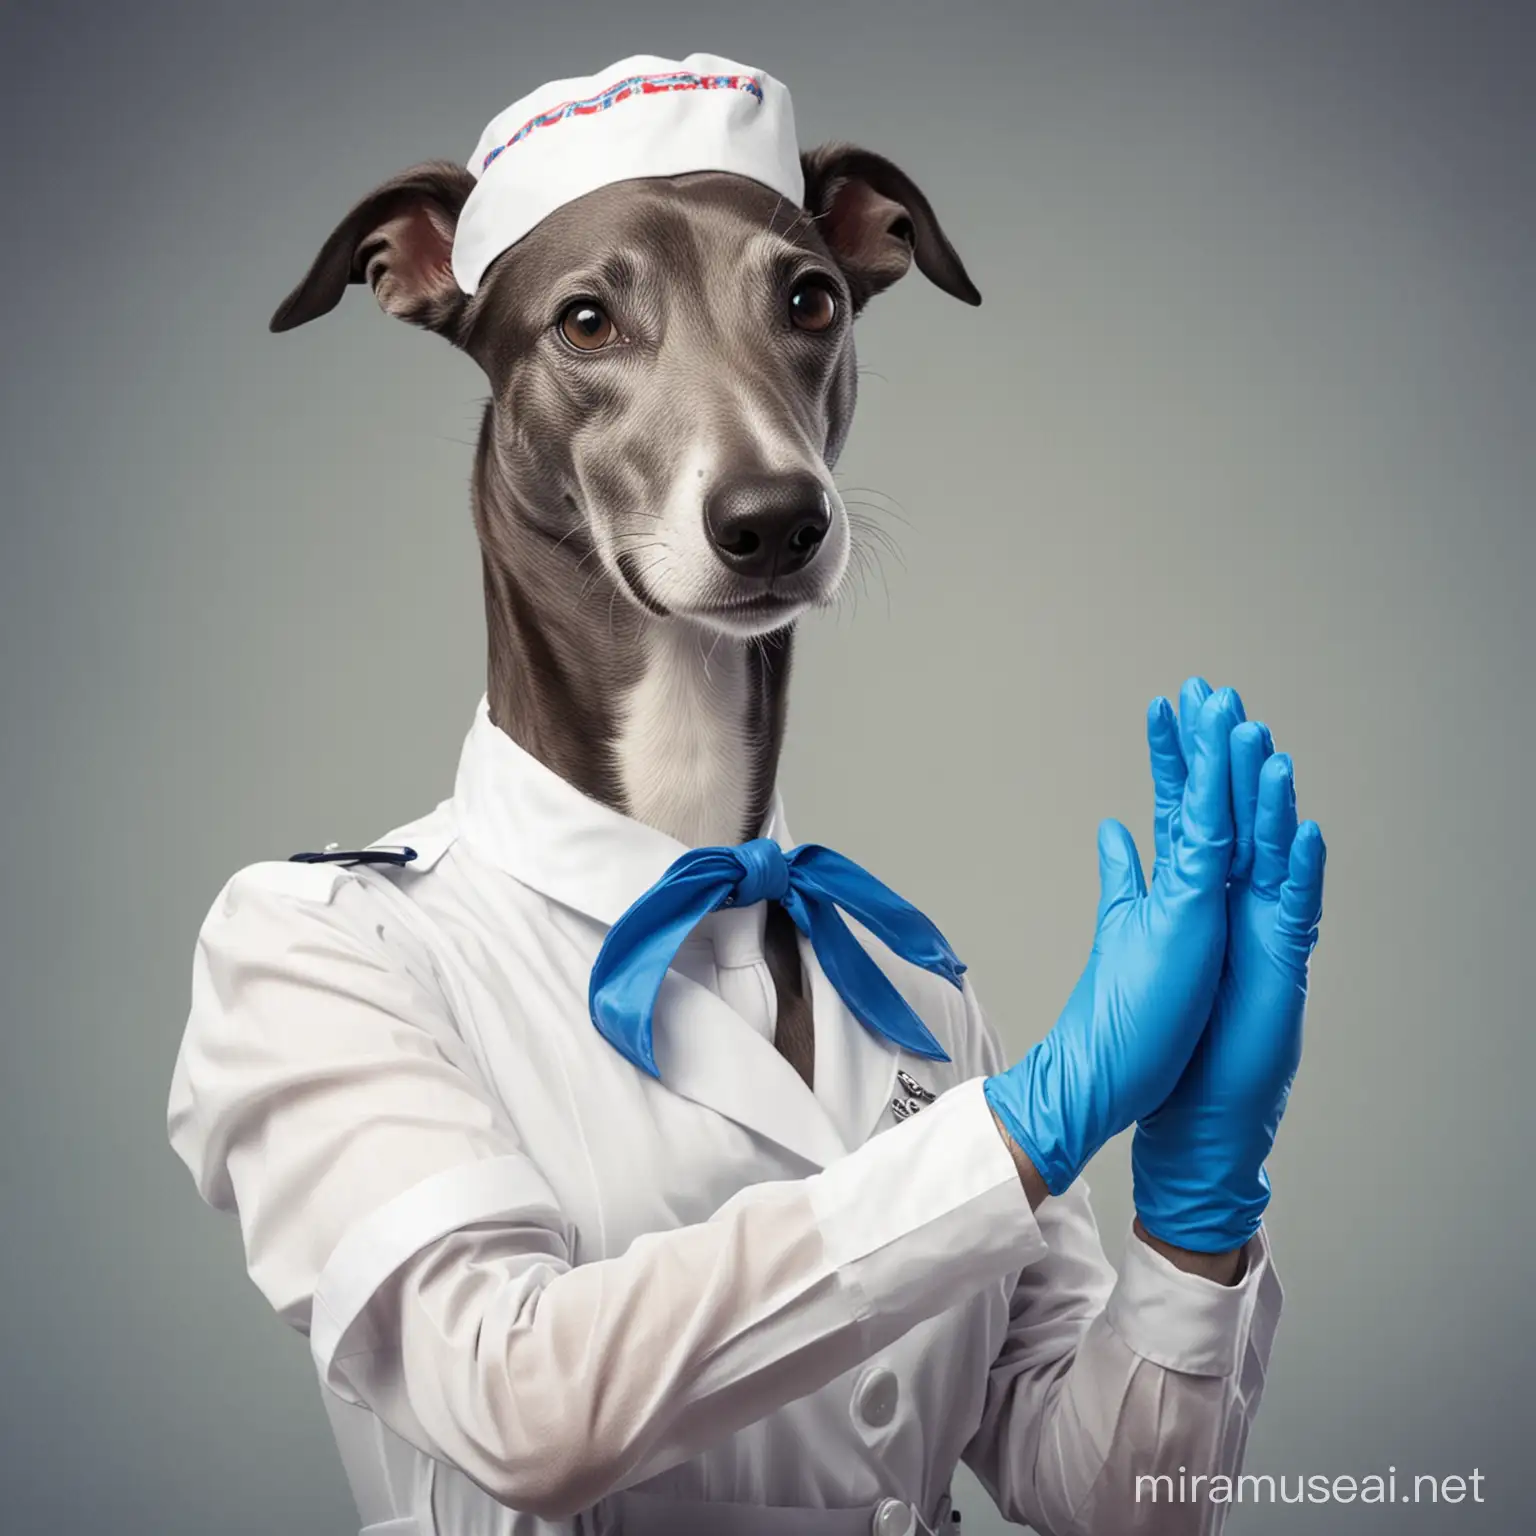 a greyhound dressed like a beautiful nurse putting on a blue plastic glove looking sexy, comic style